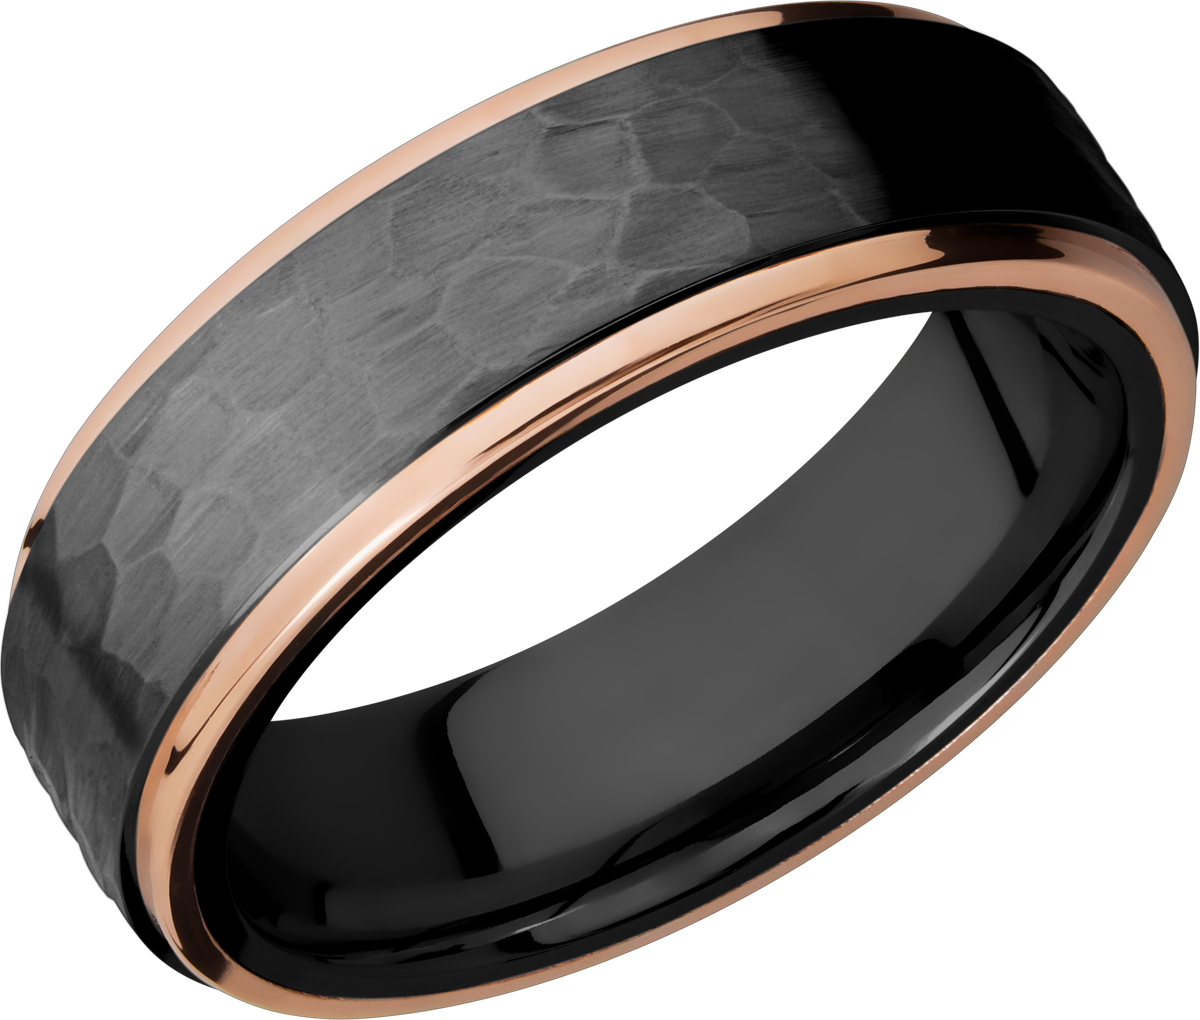 Black zirconium 7mm flat band with grooved edges, each edge has an inlay that is 1mm wide of 14k ro